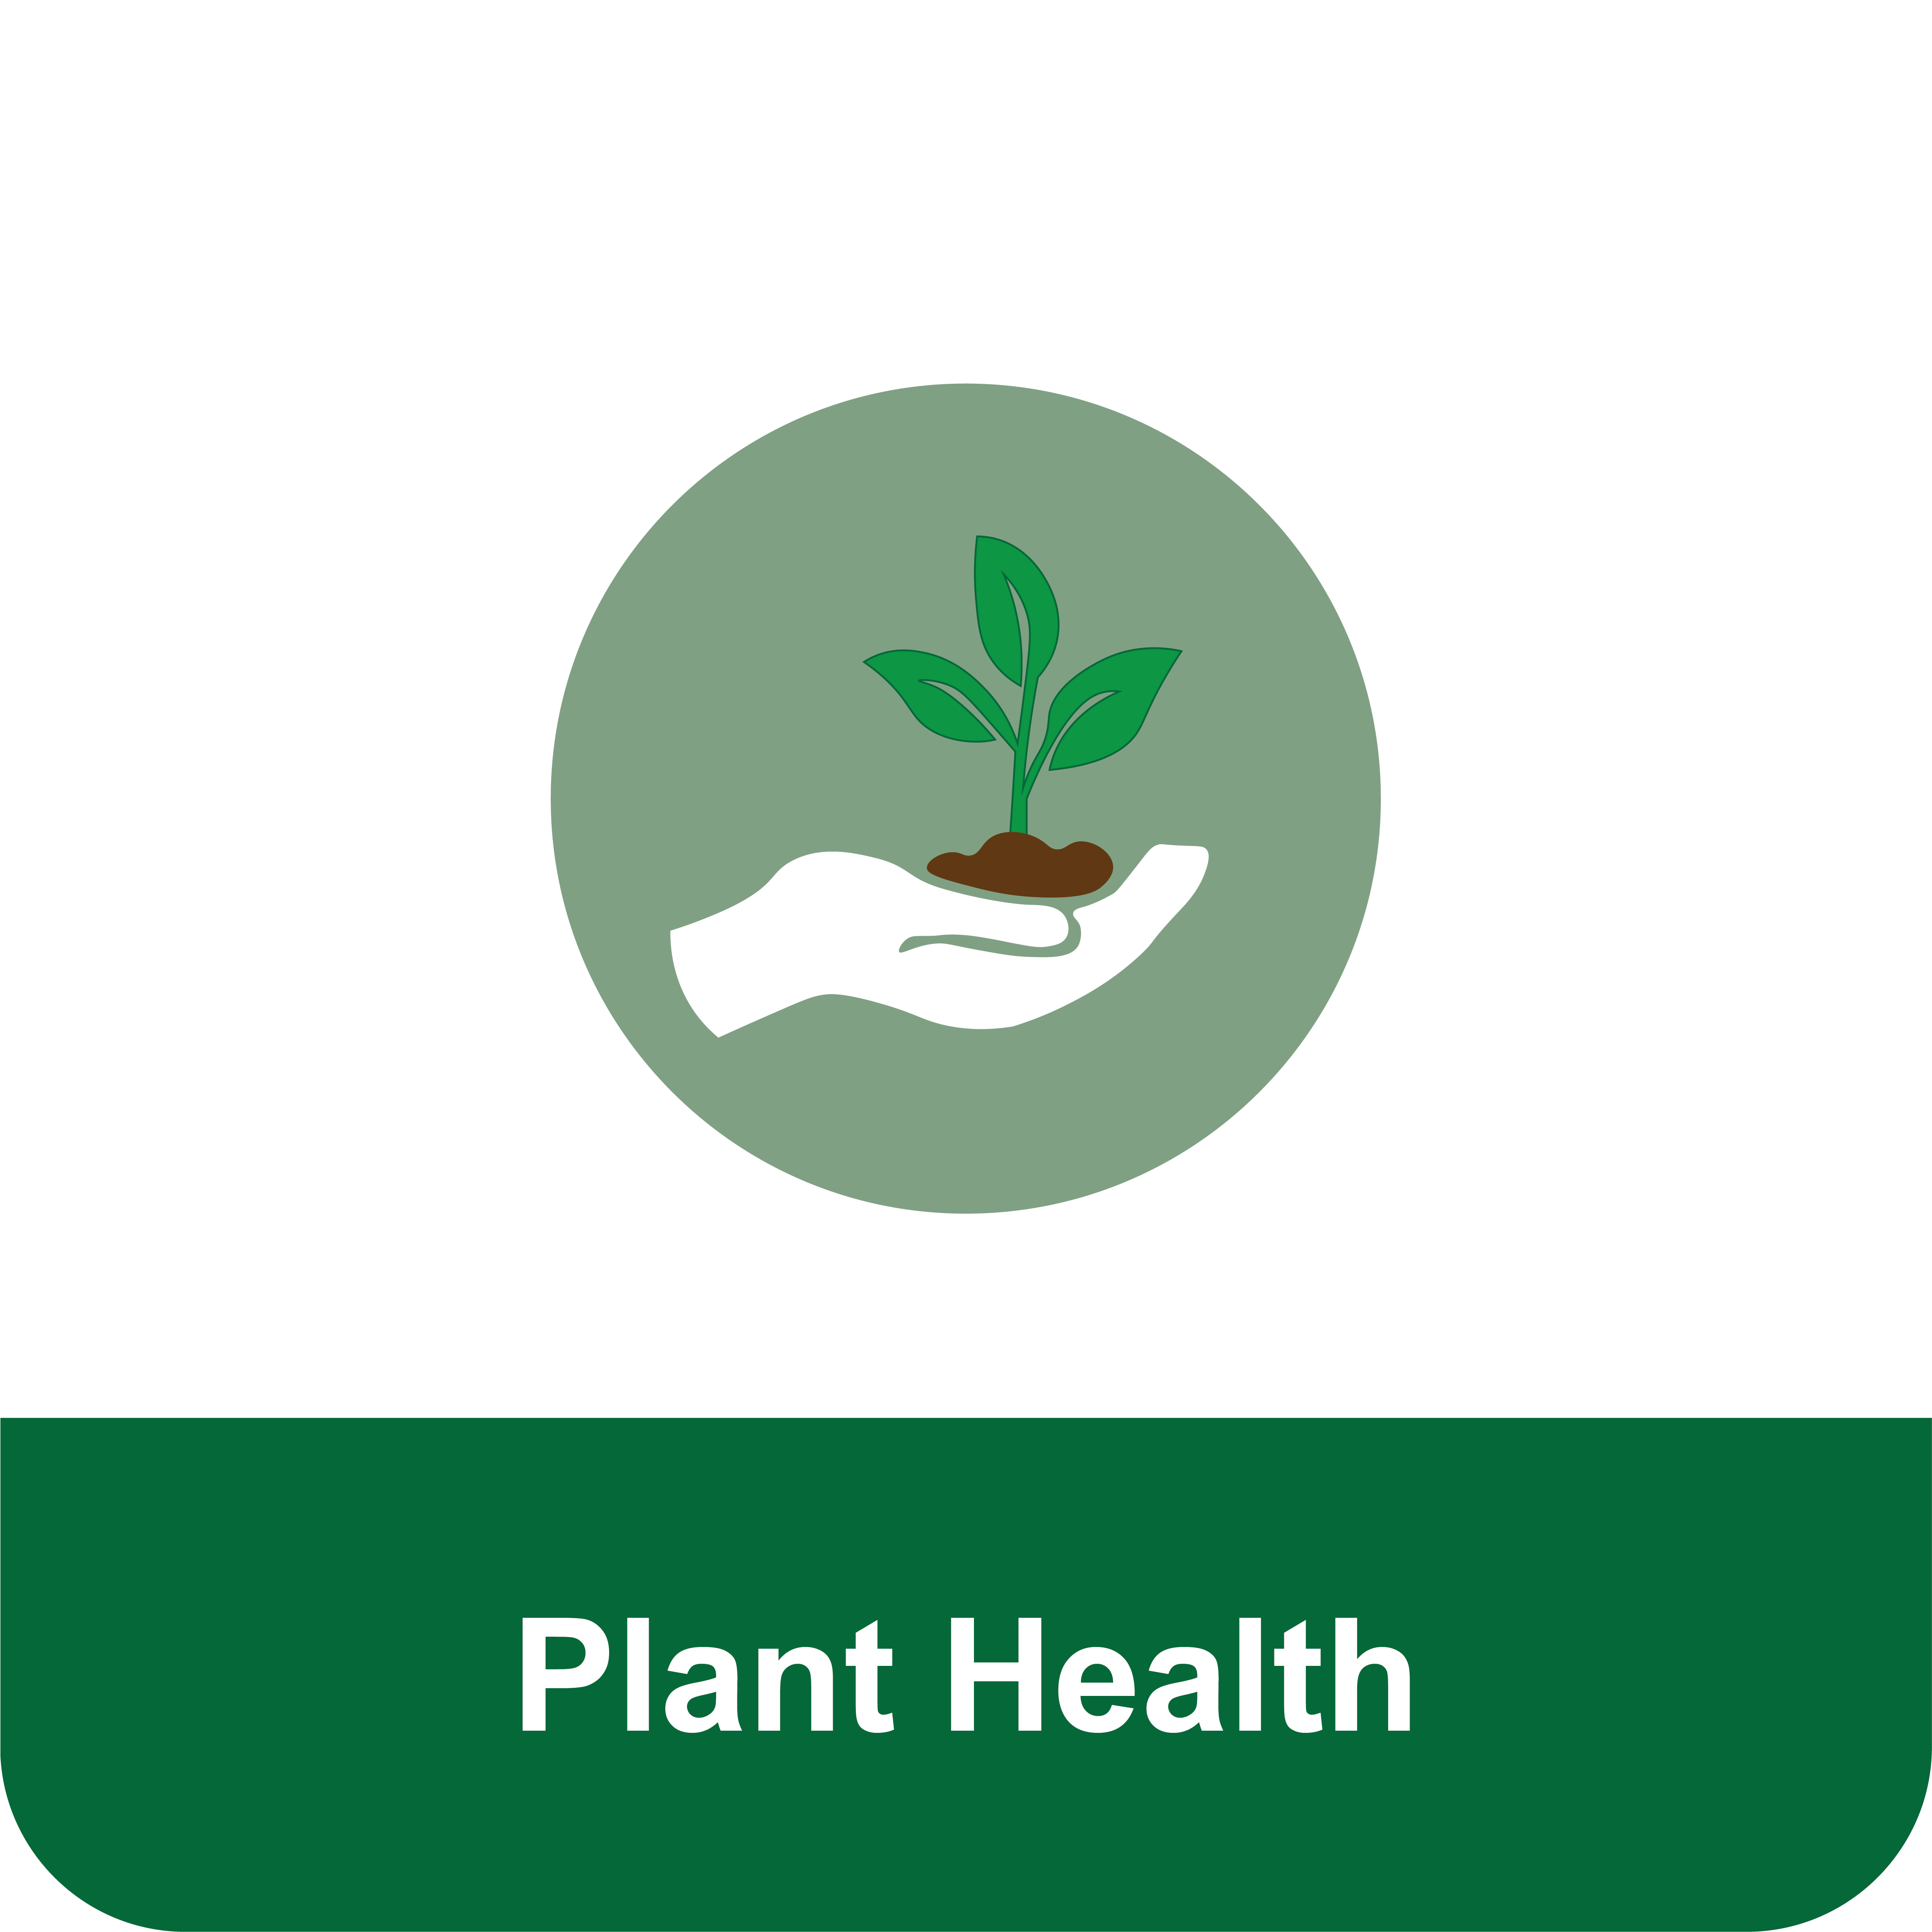 Title that reads "Plant Health" under an icon of a hand holding a seedling.